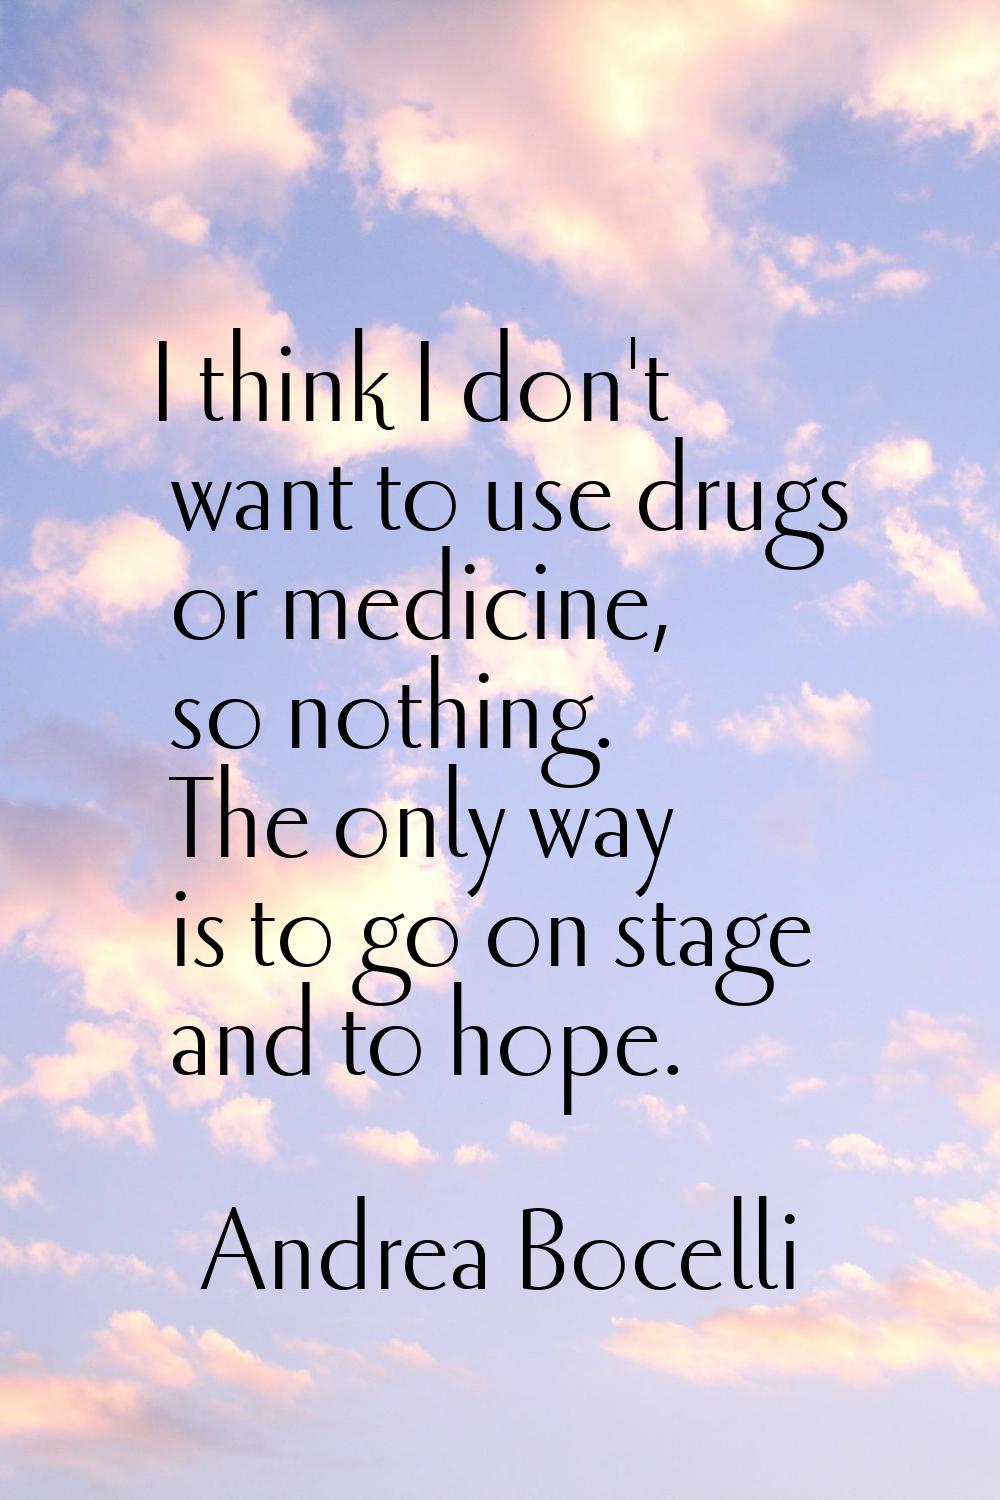 I think I don't want to use drugs or medicine, so nothing. The only way is to go on stage and to ho